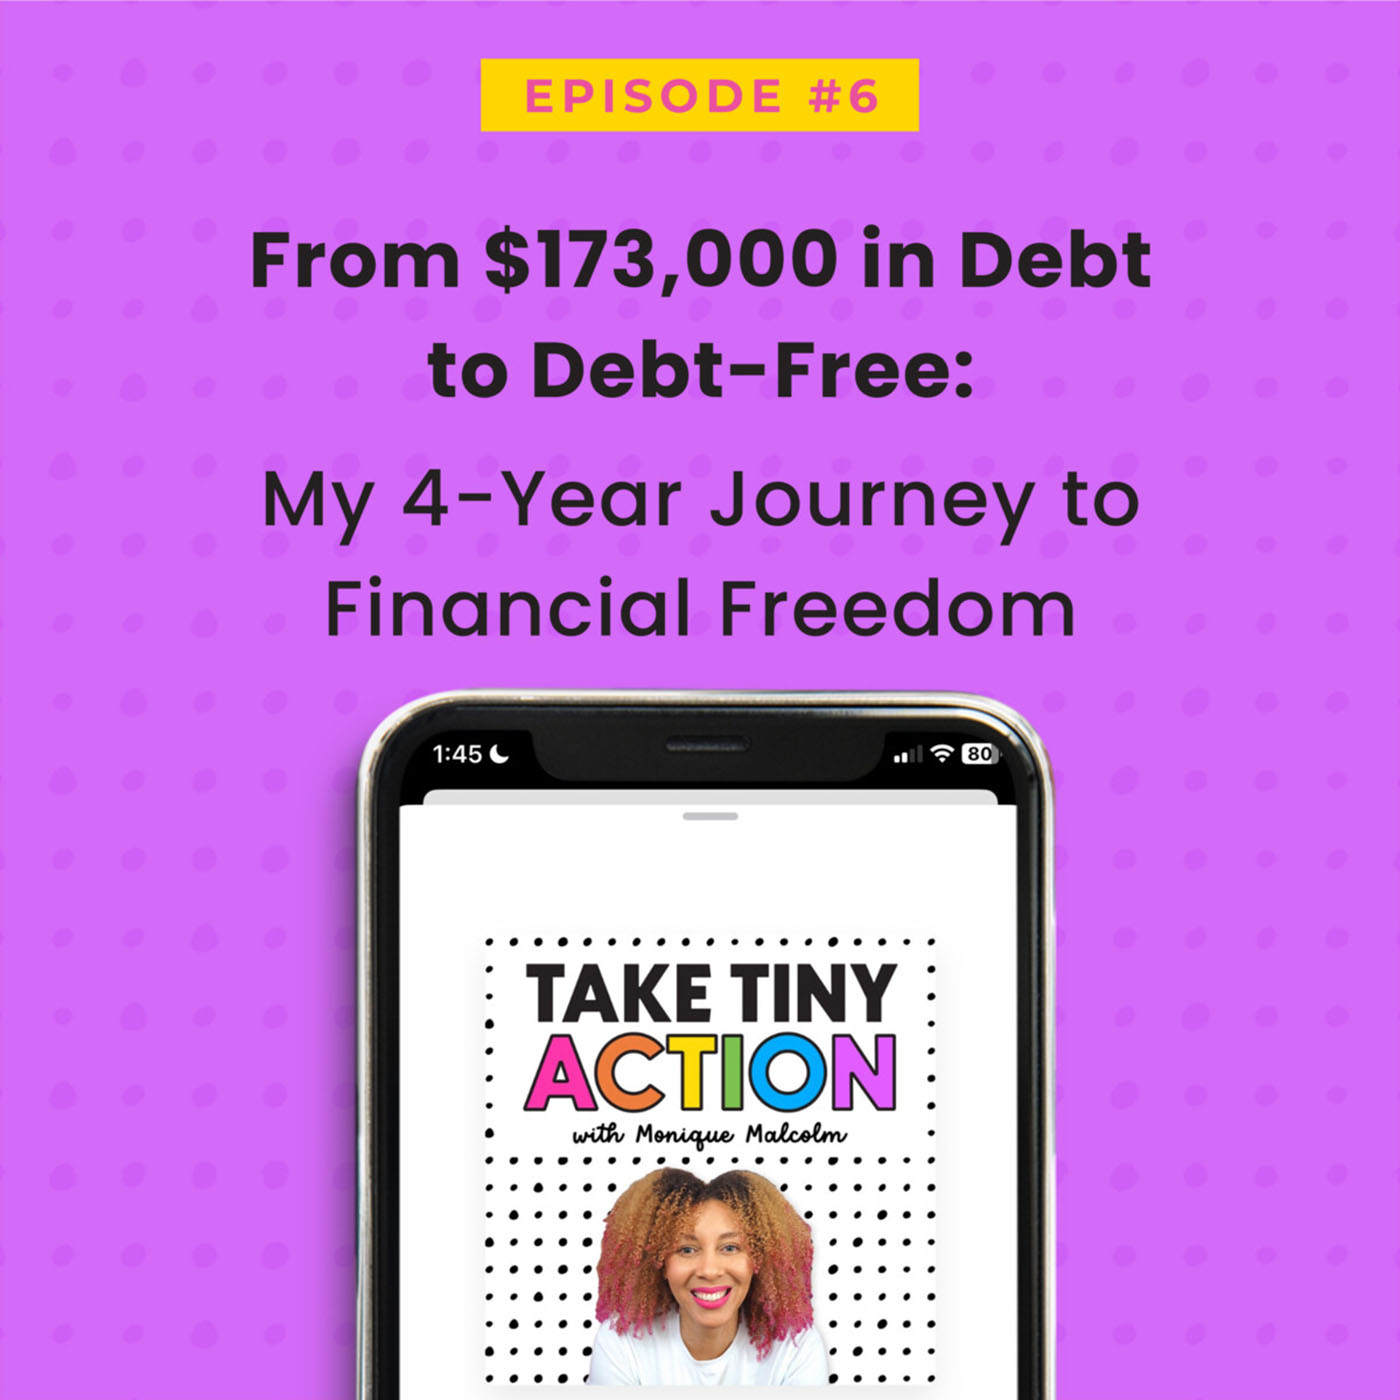 From $173,000 in Debt to Debt-Free: My 4-Year Journey to Financial Freedom